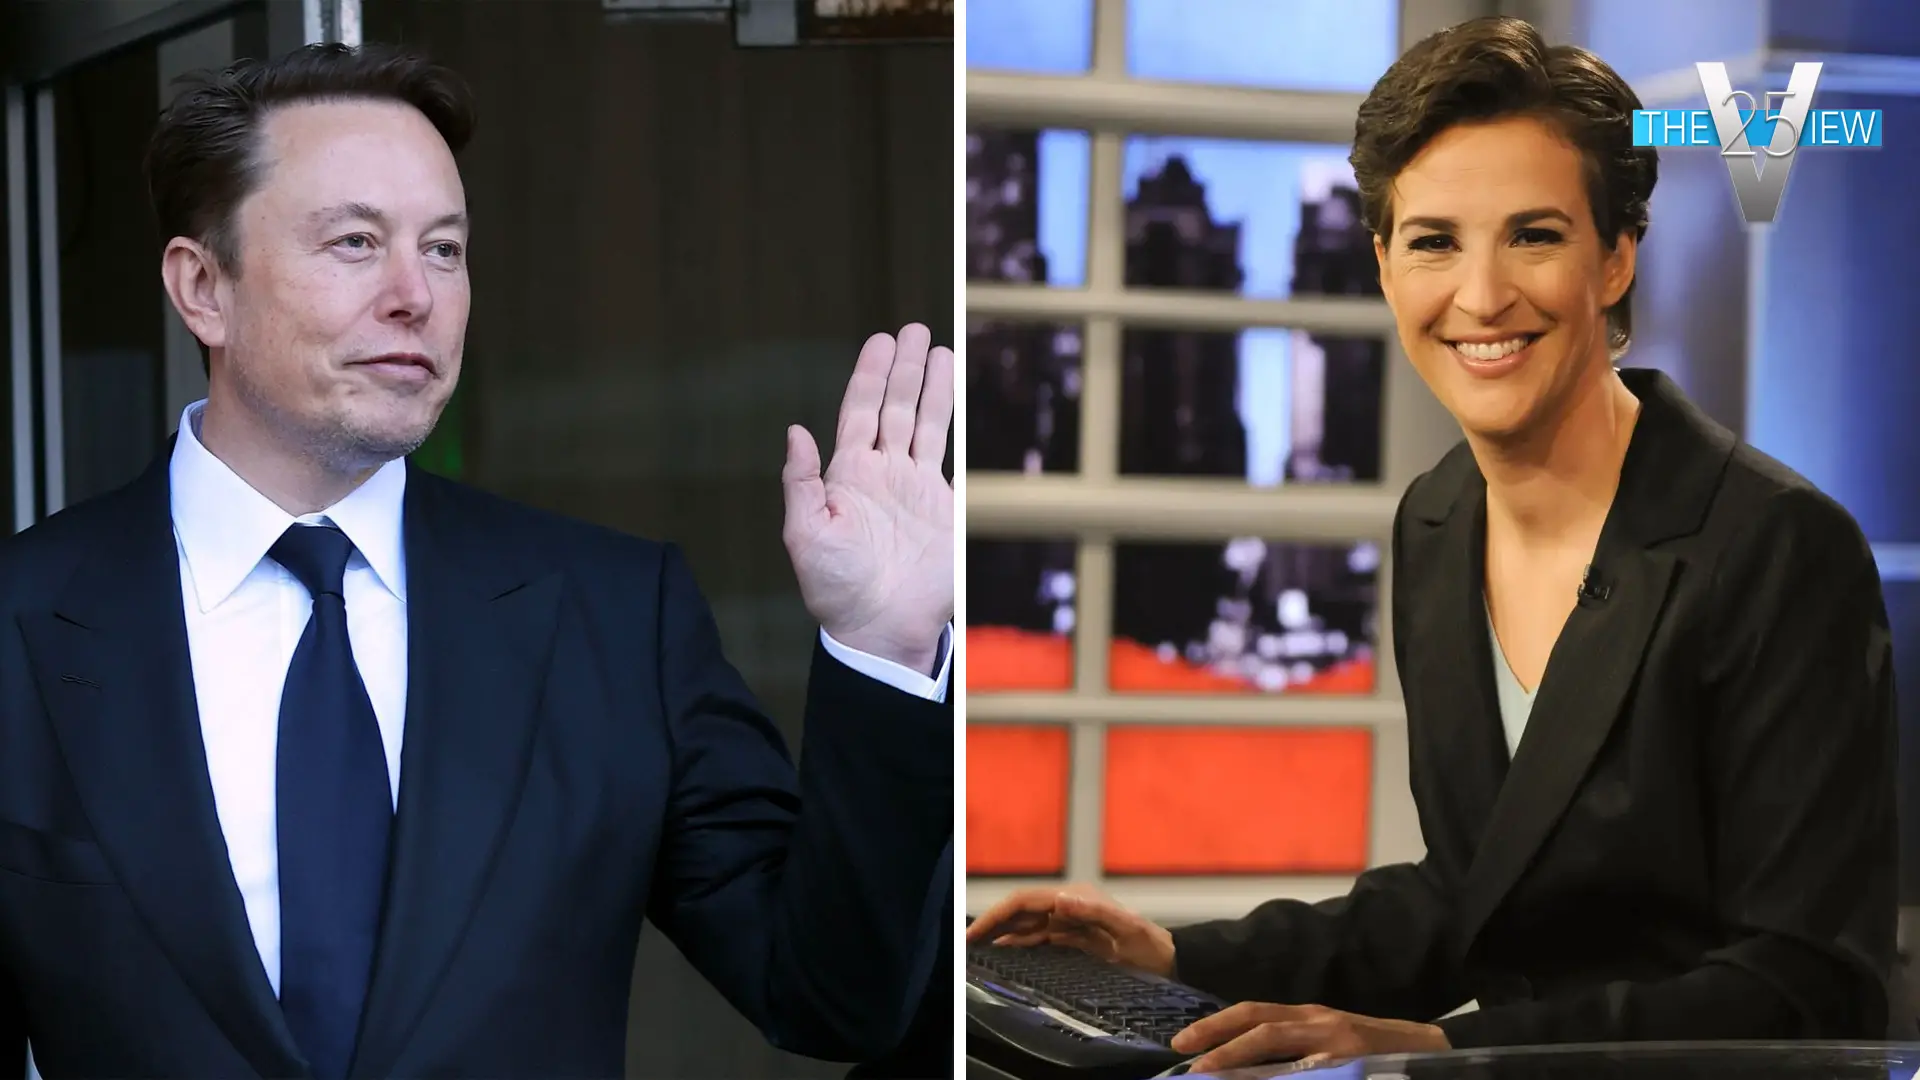 Just in: ABC’s New Owner Elon Musk Hires Rachel Maddow To Join ‘The View’